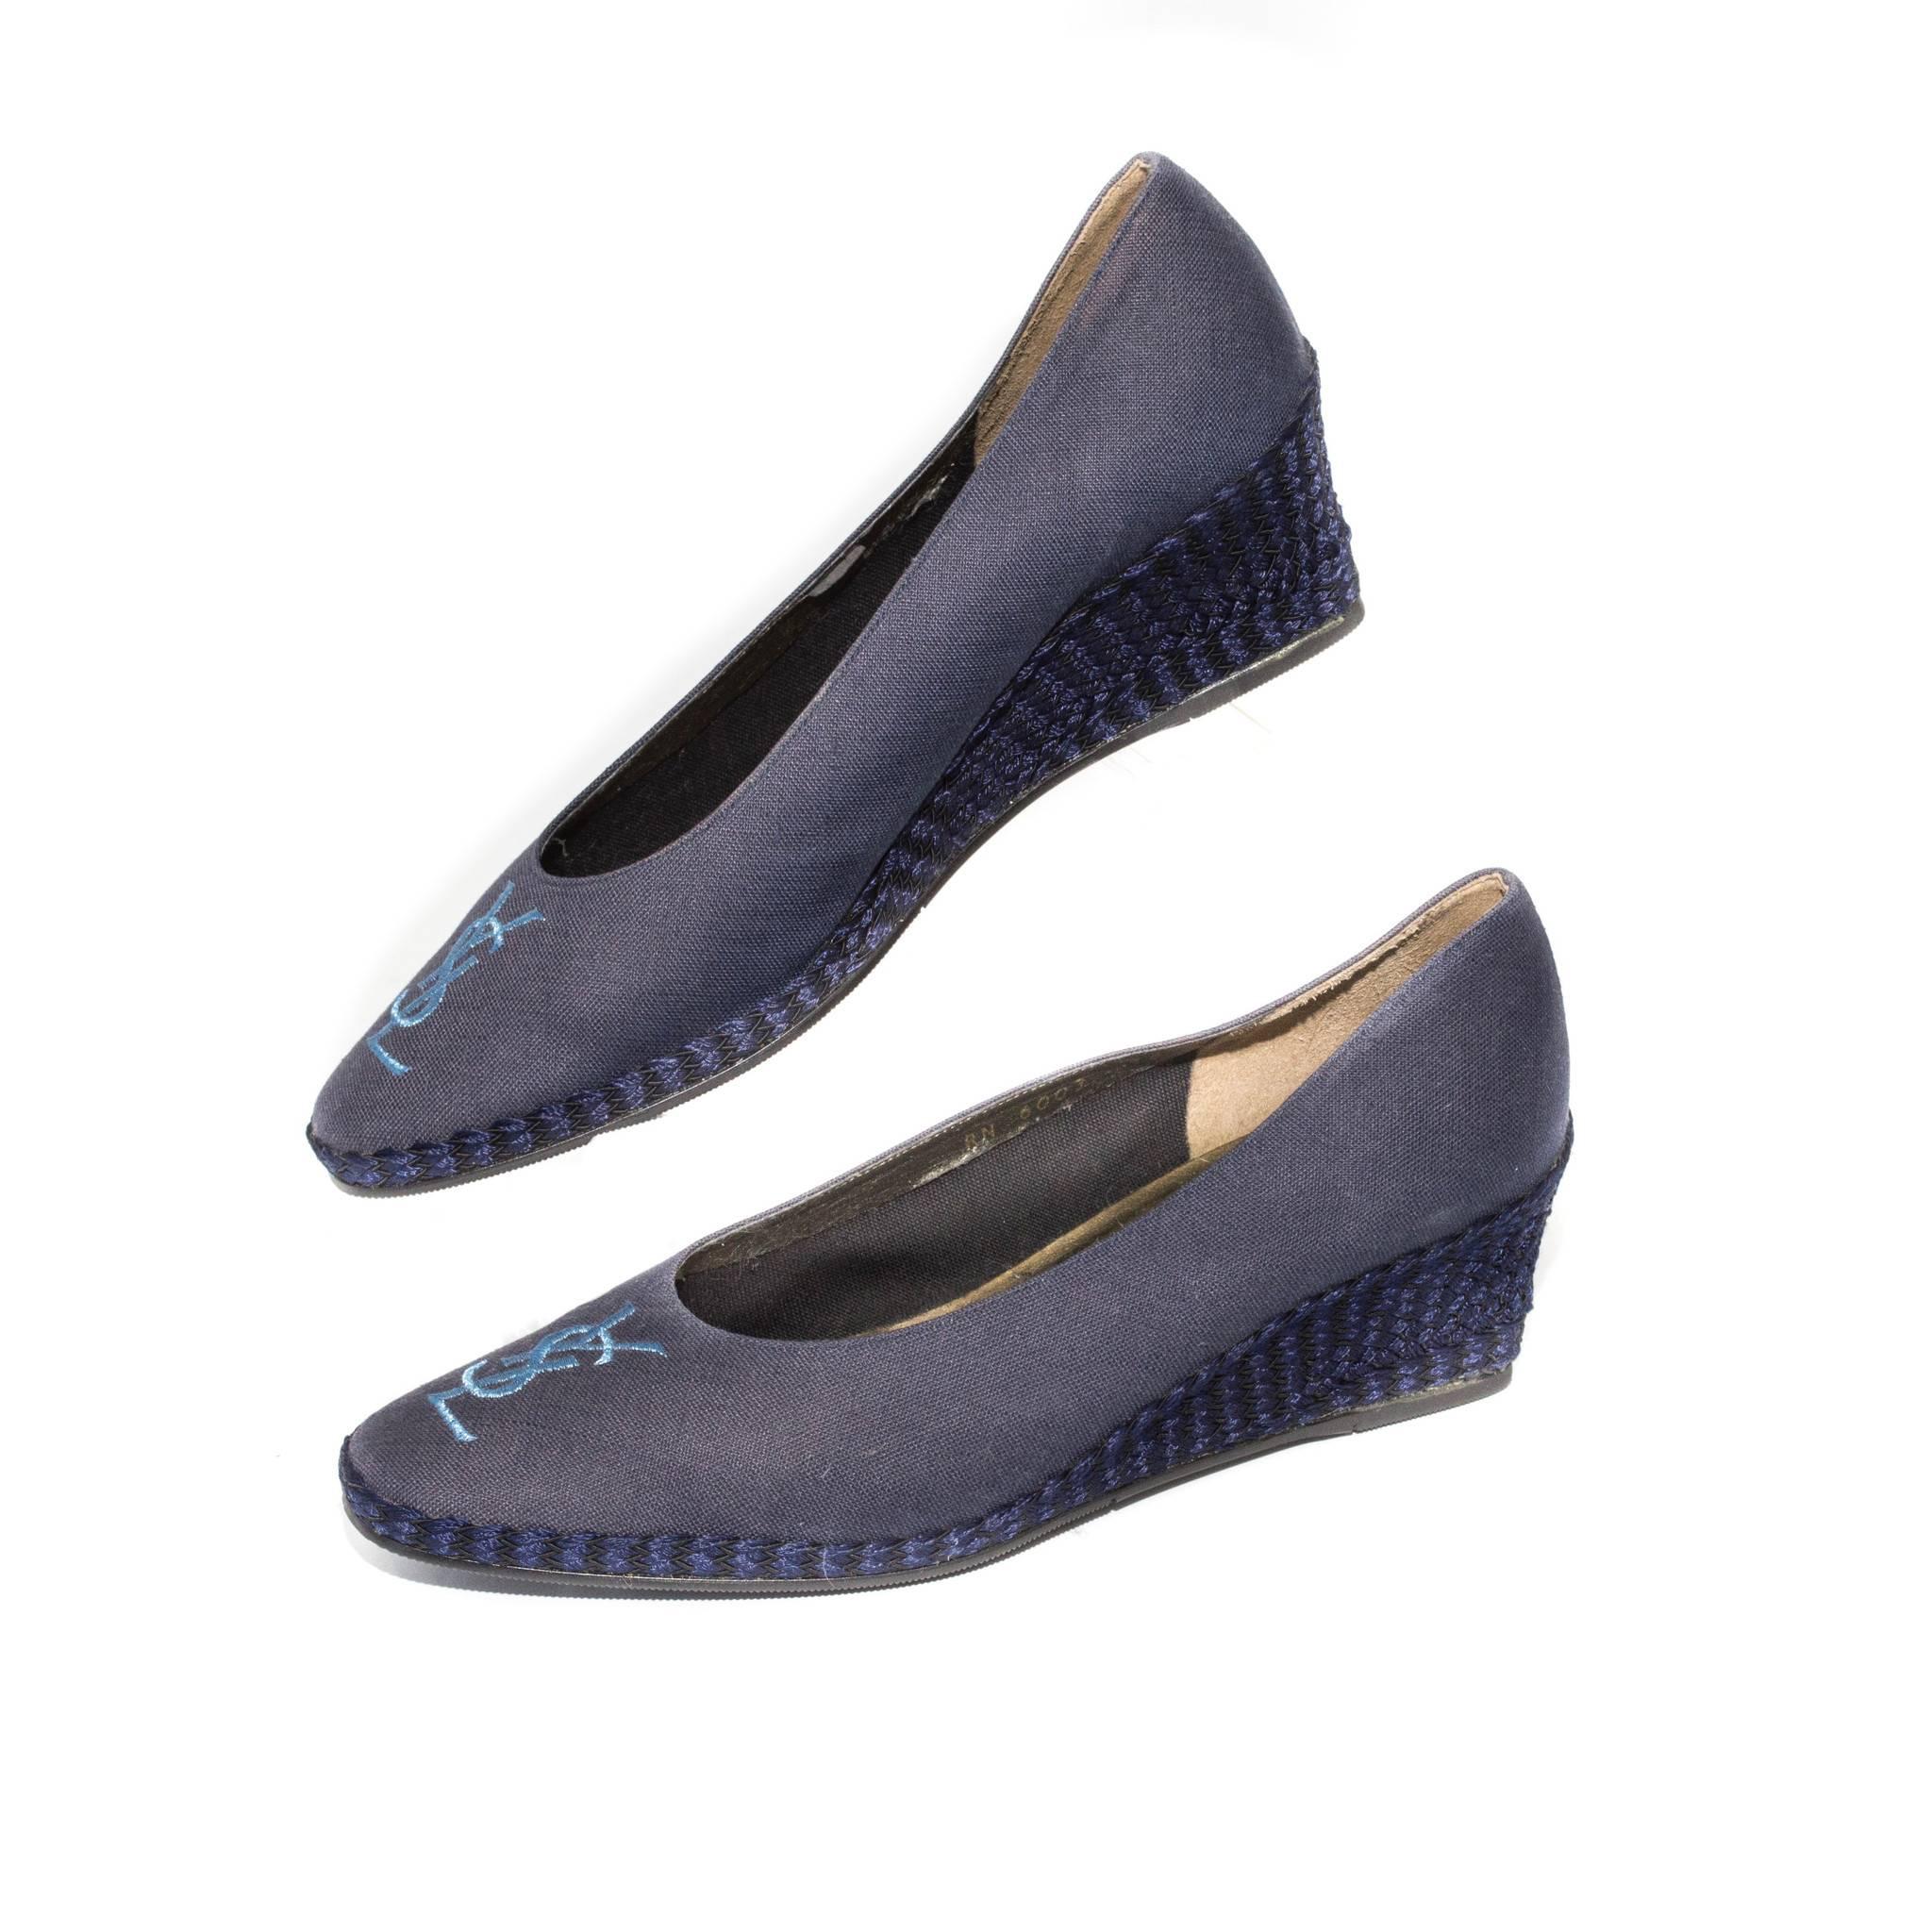 Yves Saint Laurent Blue Espadrilles with YSL Logo Detail.

Size Marked: 6.5

Good Vintage Condition:Please remember all clothes are previously owned and gently worn. These shoes shows color slightly faded.